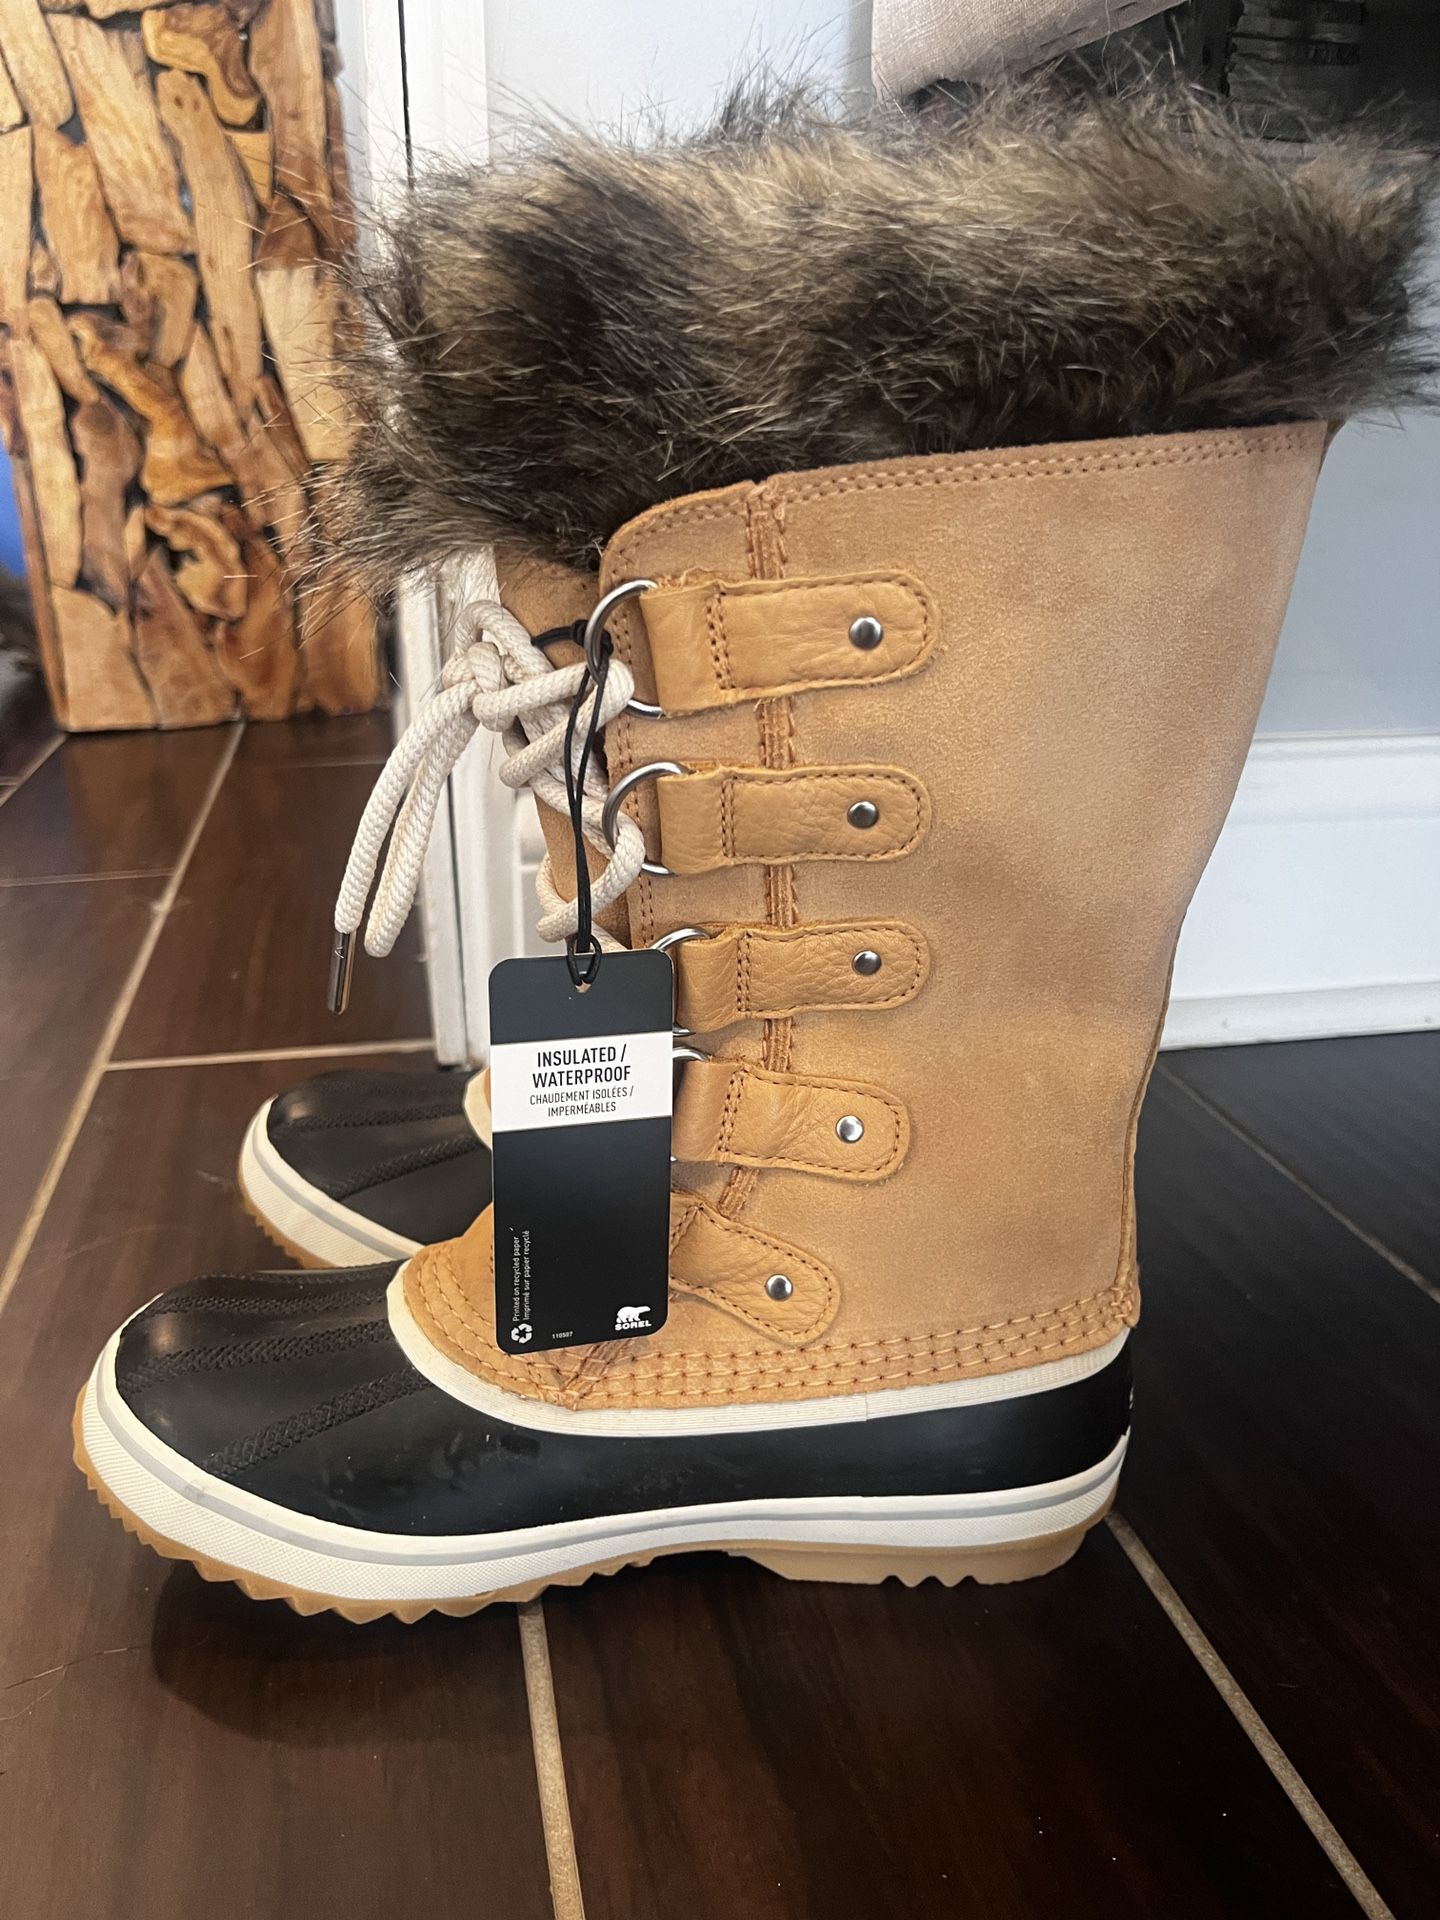 New With Tags SOREL Joan of Arctic Faux Fur Waterproof Snow Boot 